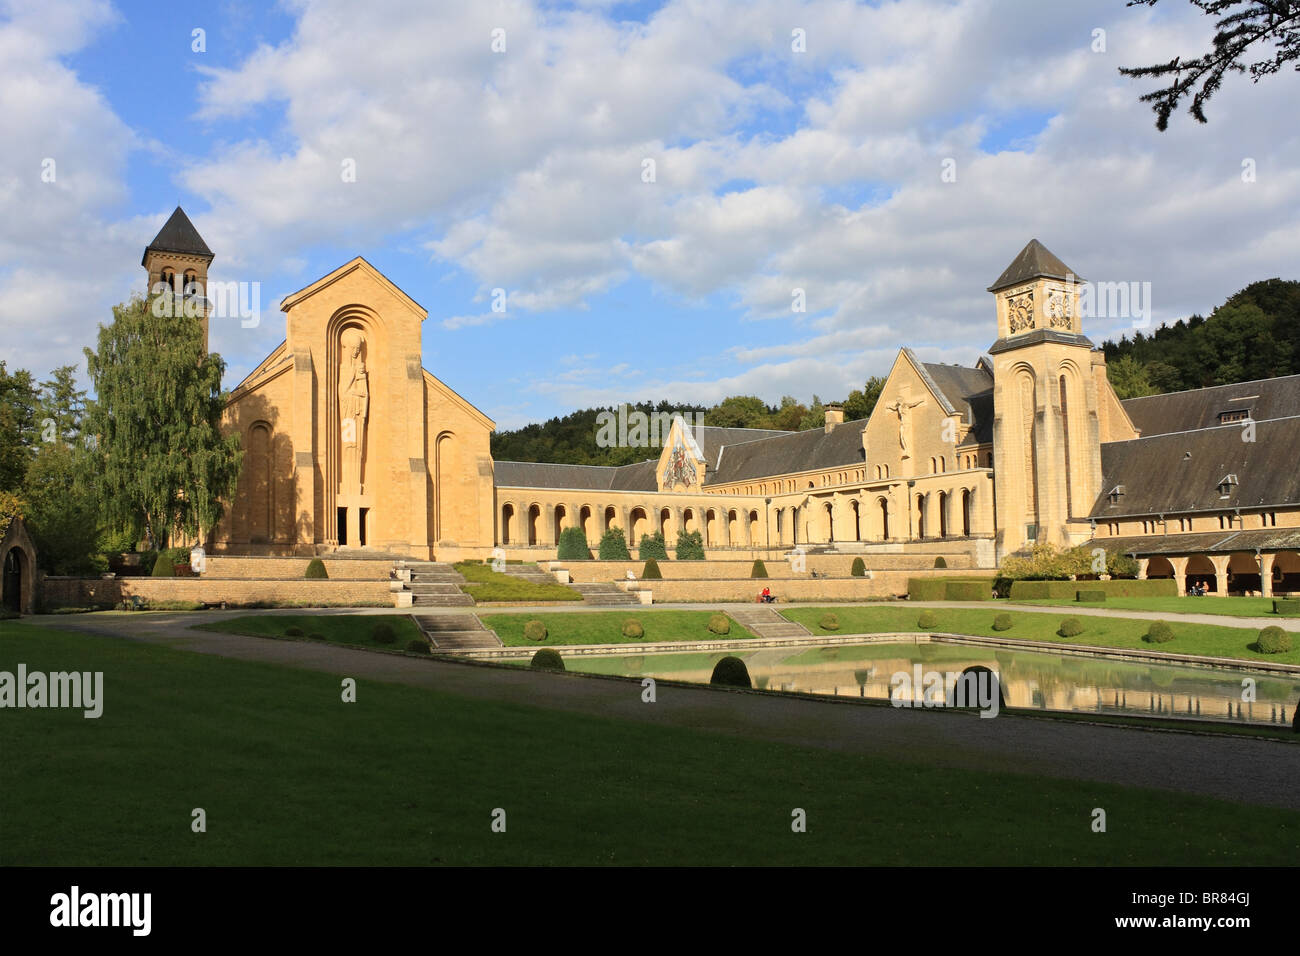 Abbaye d'Orval (Orval Abbey) is a Cistercian monastery founded in 1132 in Gaume region of Belgium. Stock Photo